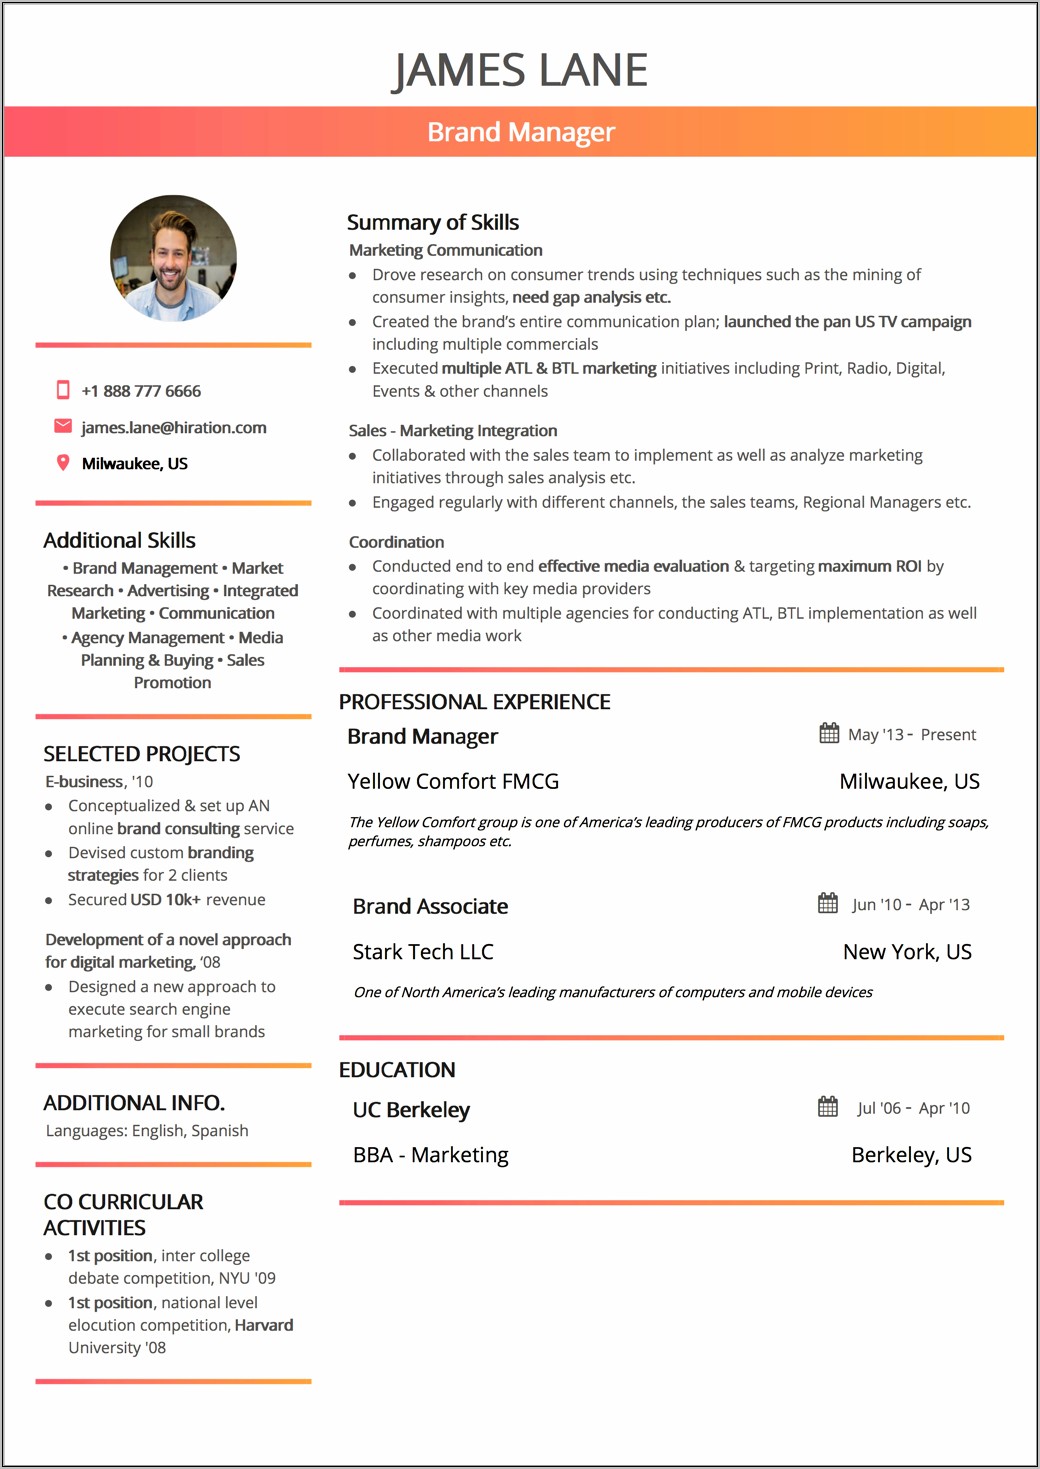 Small Dots To Separate Words On Resume